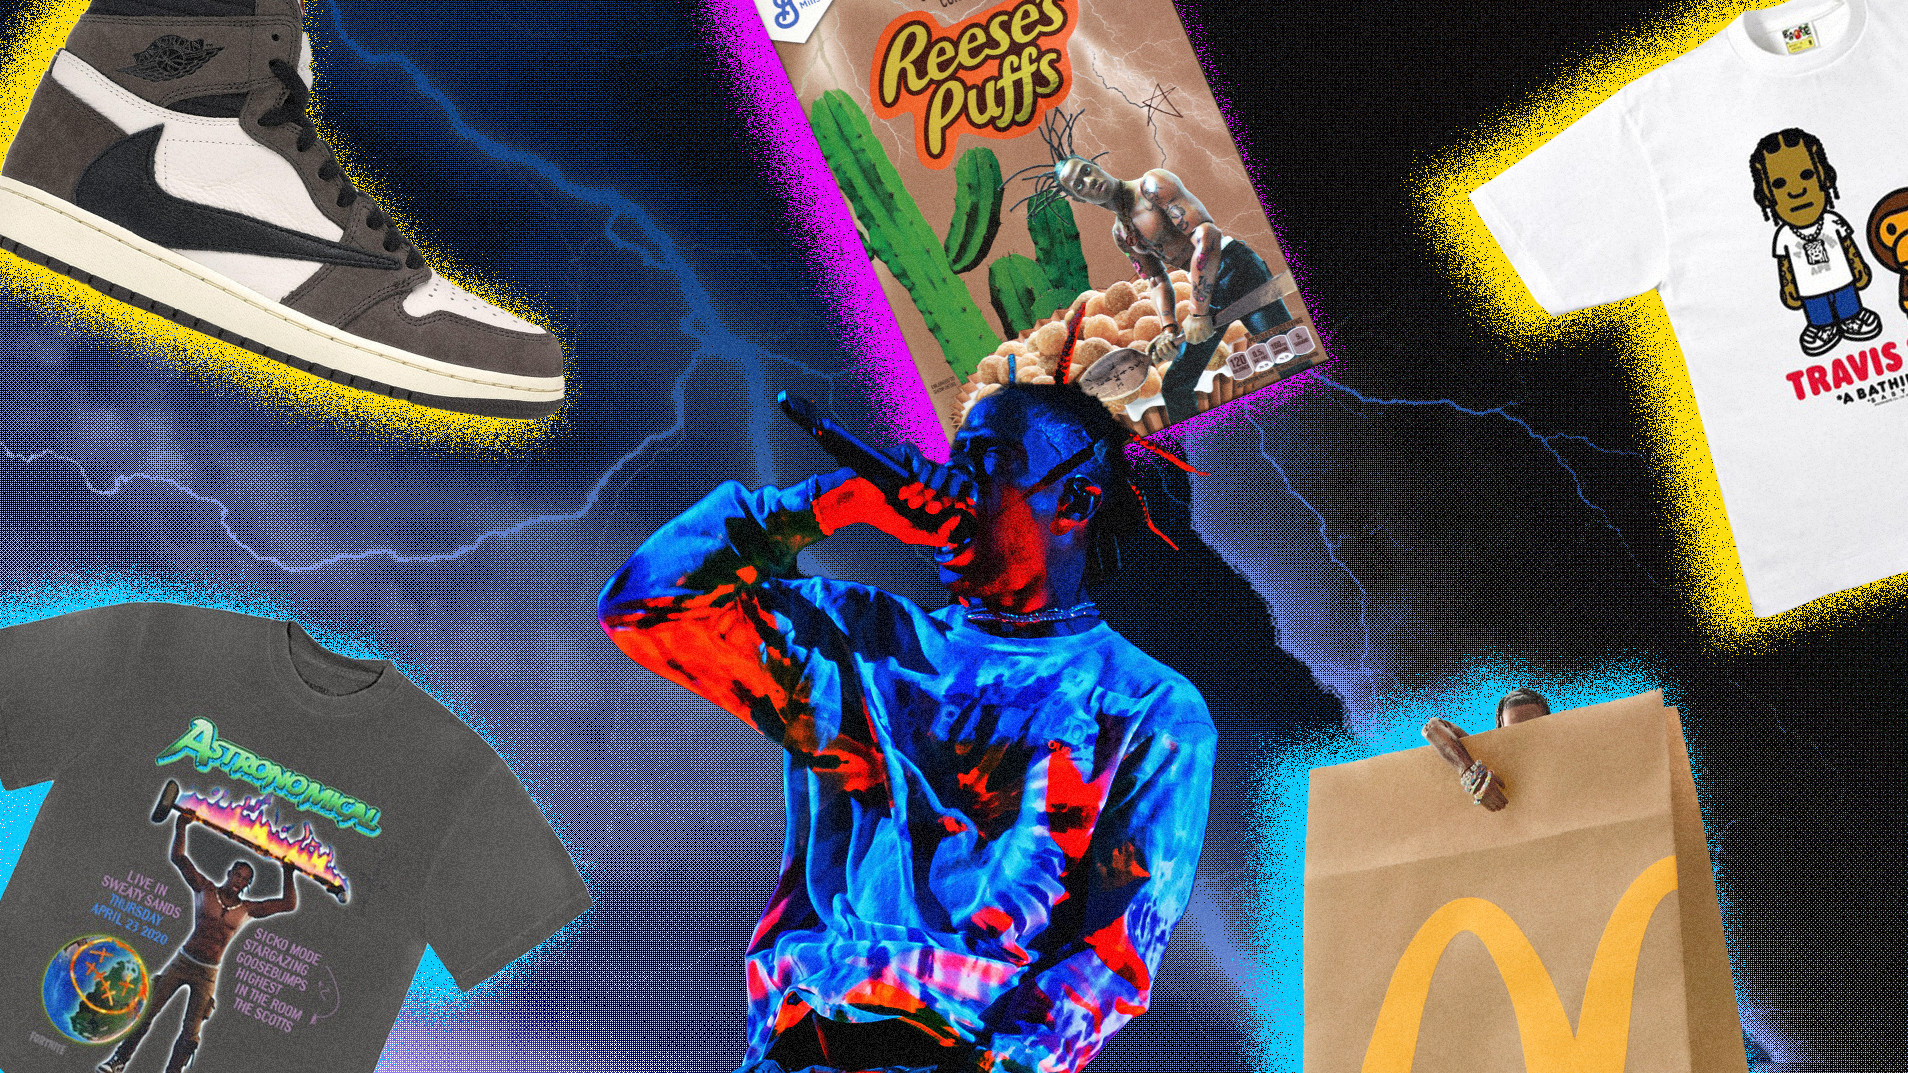 A Timeline of Travis Scott's Brand Collaborations